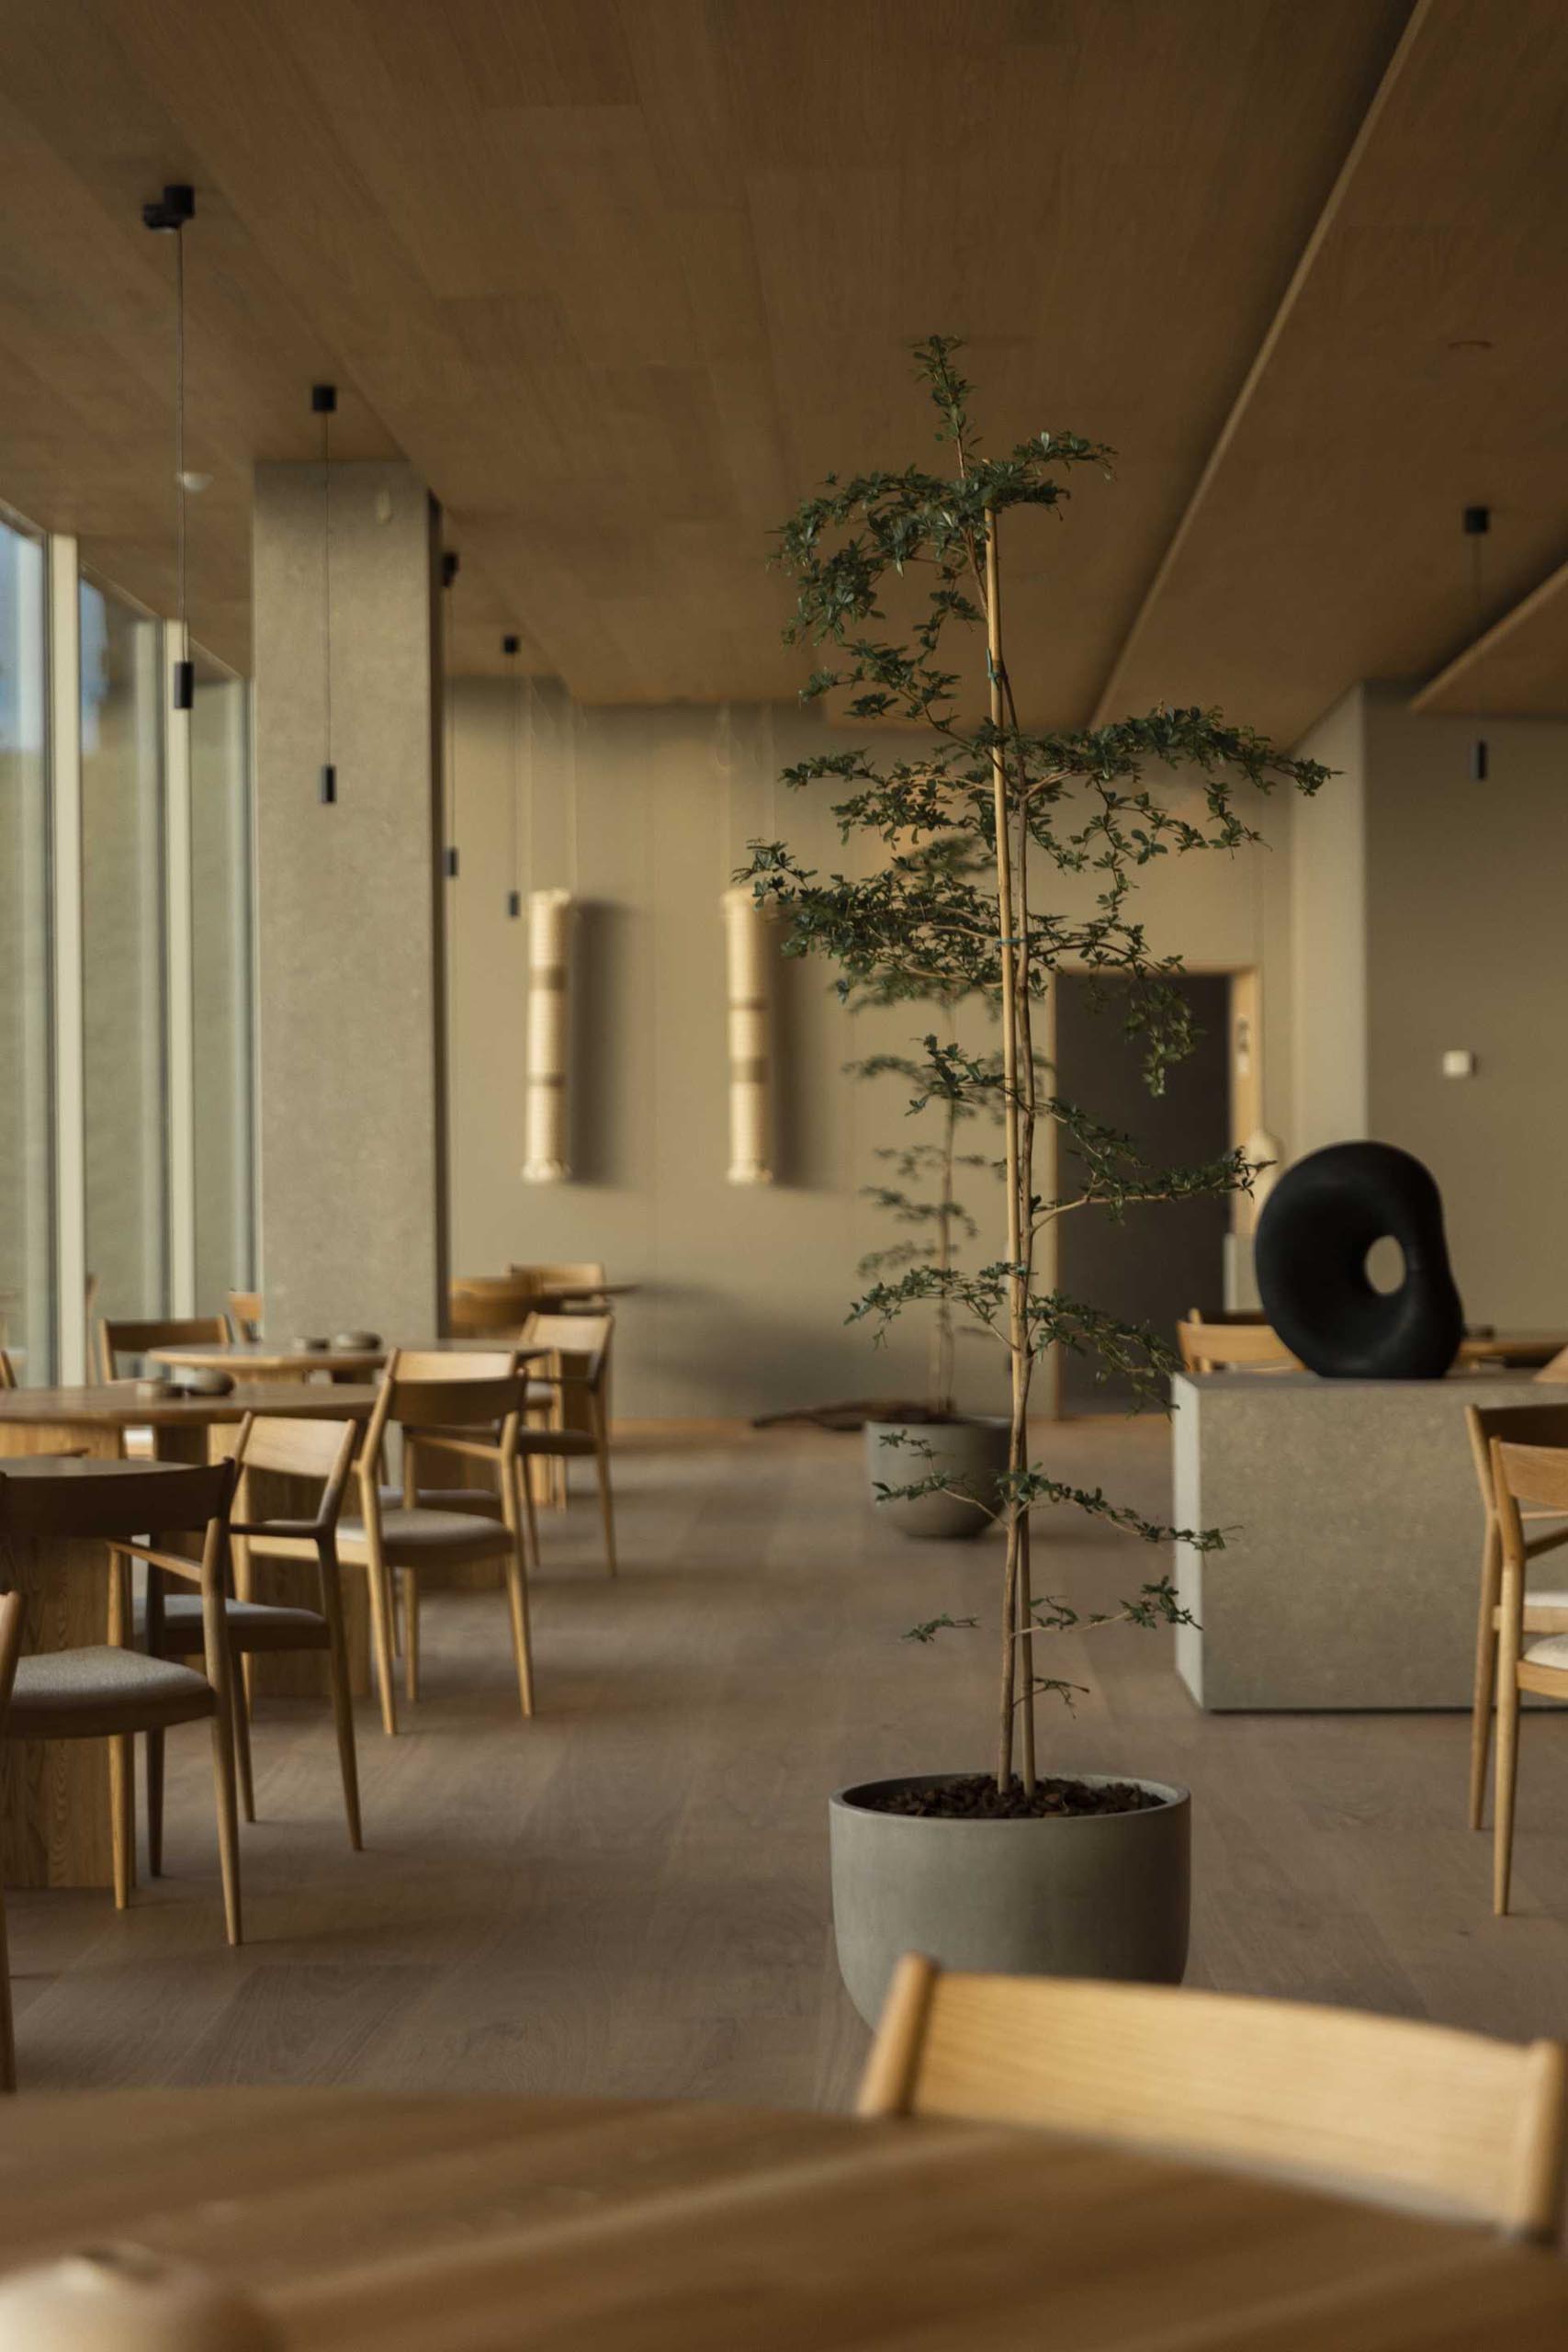 A restaurant inspired by Japanese and Swedish design.